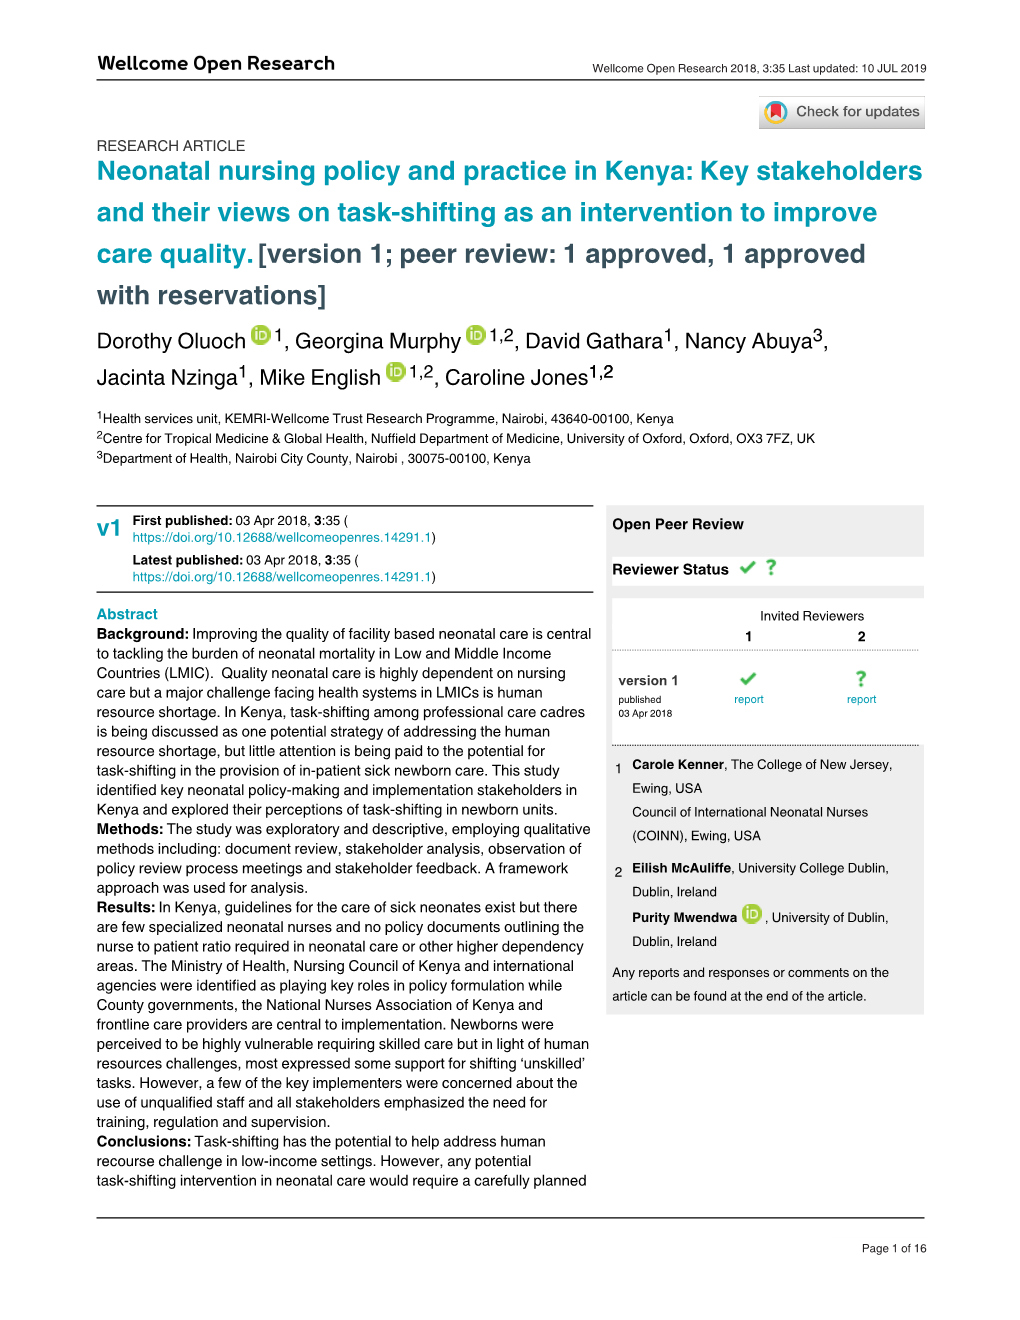 Neonatal Nursing Policy and Practice in Kenya: Key Stakeholders and Their Views on Task-Shifting As an Intervention to Improve Care Quality